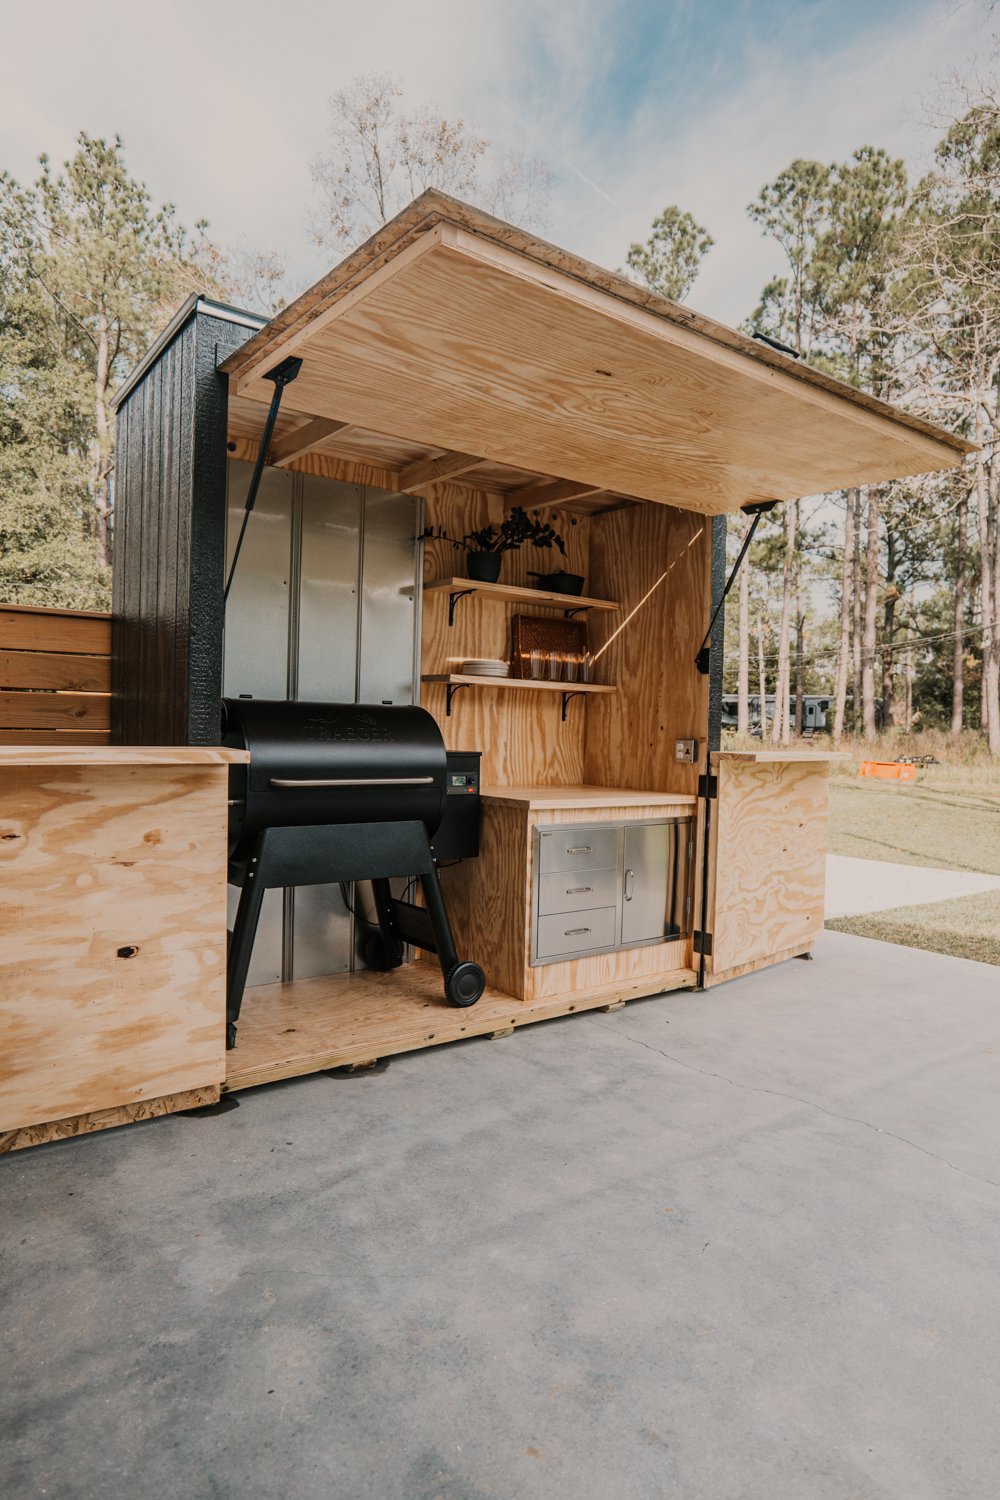 https://images.squarespace-cdn.com/content/v1/5f74a12d3742481b948feccc/1670612522133-14FR8UKW37SWITRLBTH0/OP-closable-outdoor-kitchen-P1102602.jpg?format=1000w